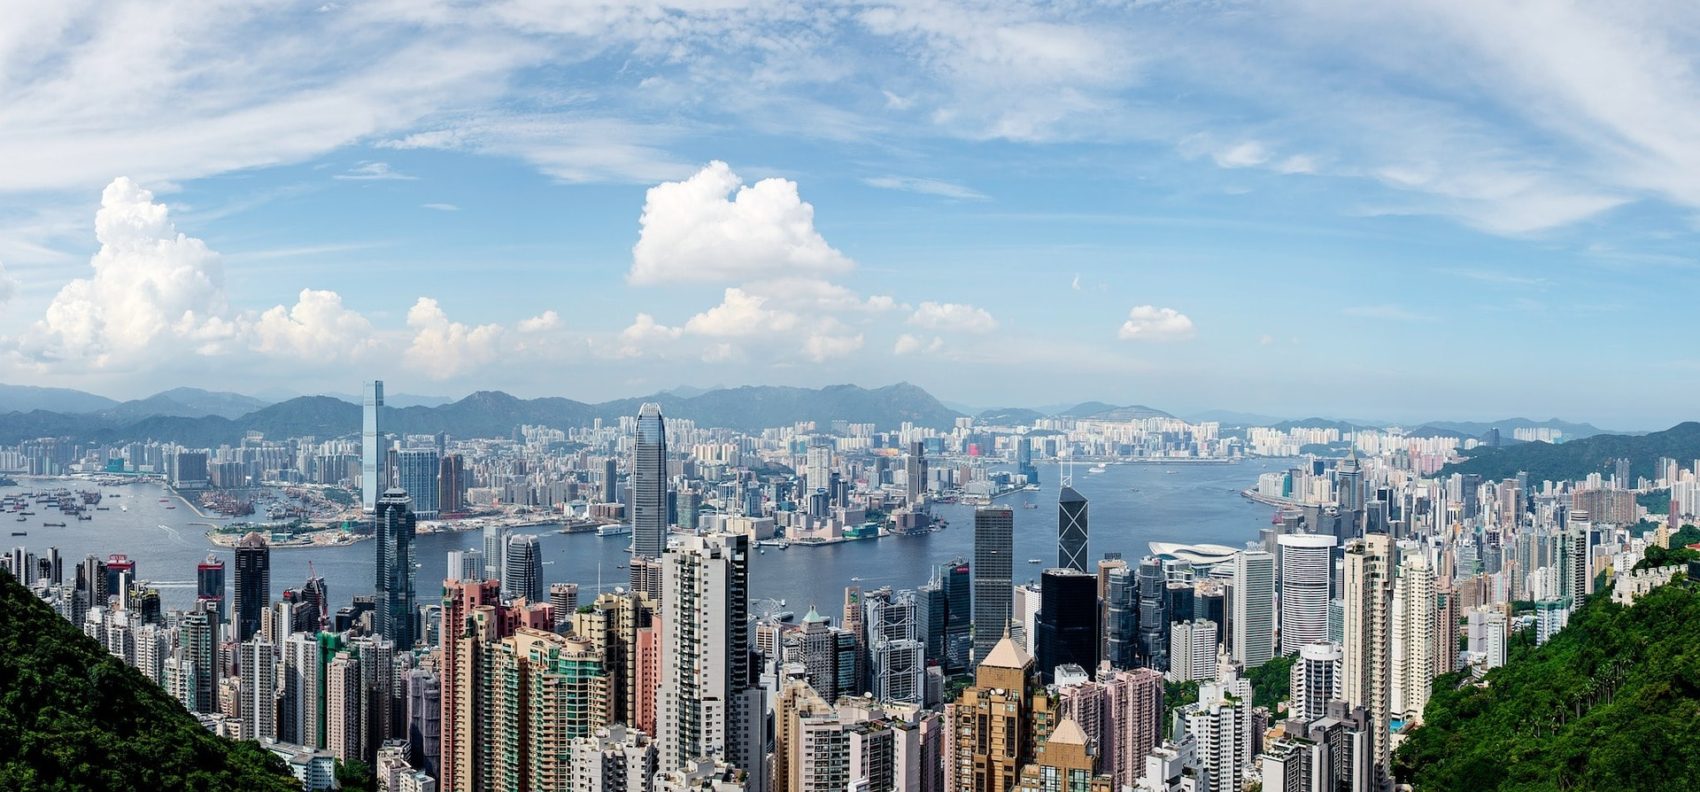 China Greater Bay Area: Infrastructure is key, Hong Kong “core city”